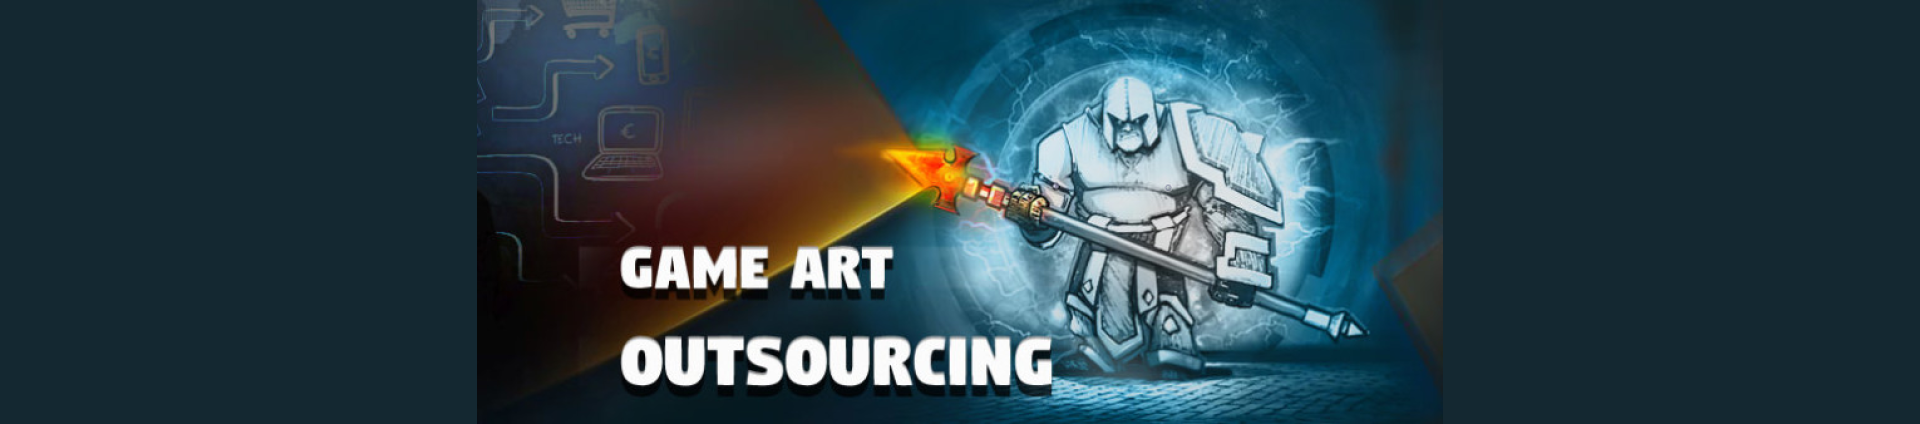 Mobile Game Art Outsourcing